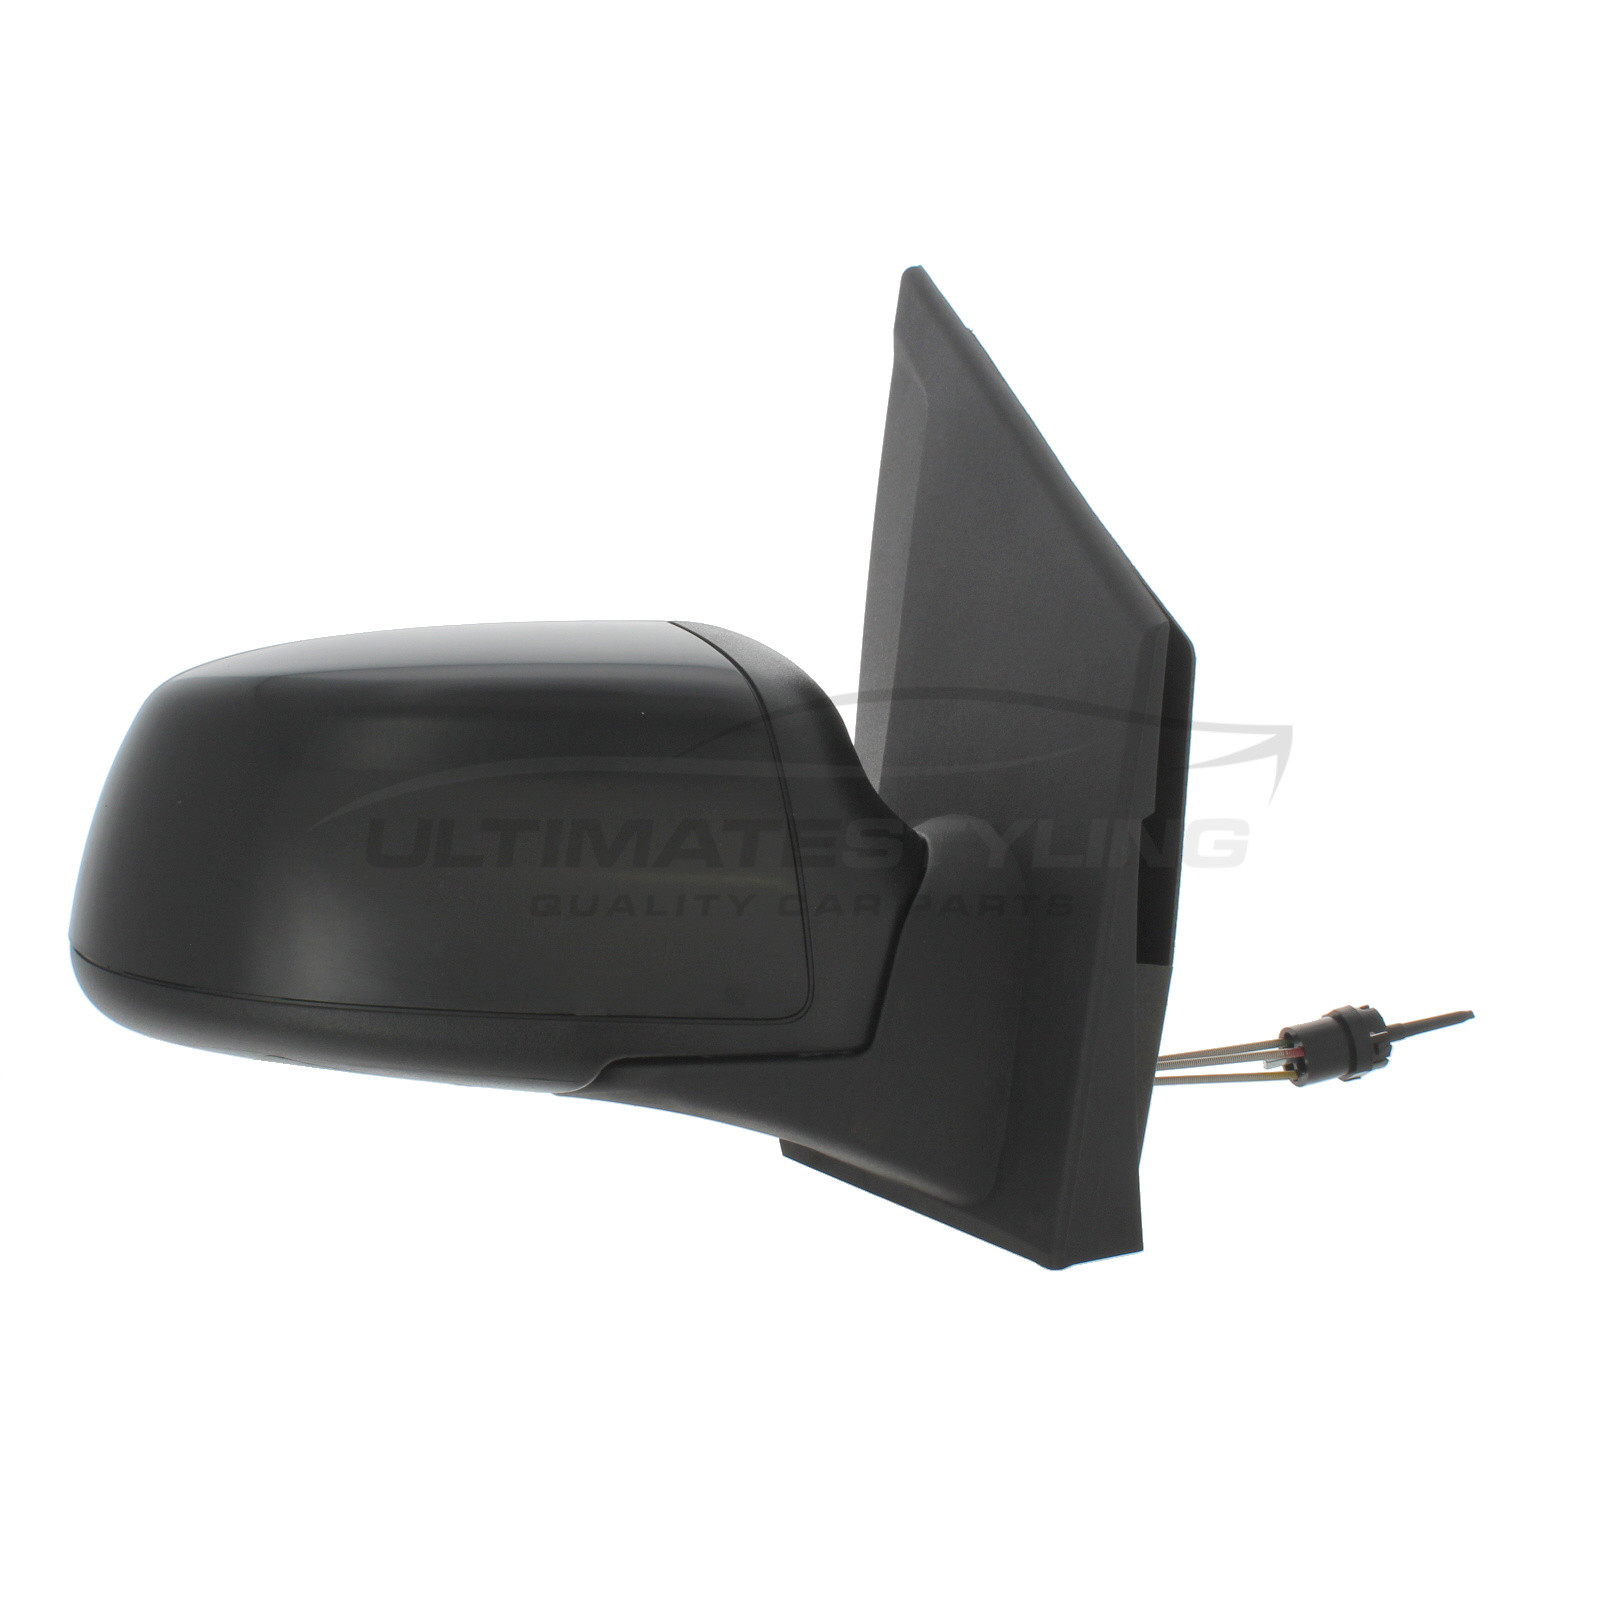 Ford Fiesta Wing Mirror / Door Mirror - Drivers Side (RH) - Cable adjustment - Non-Heated Glass - Paintable - Black